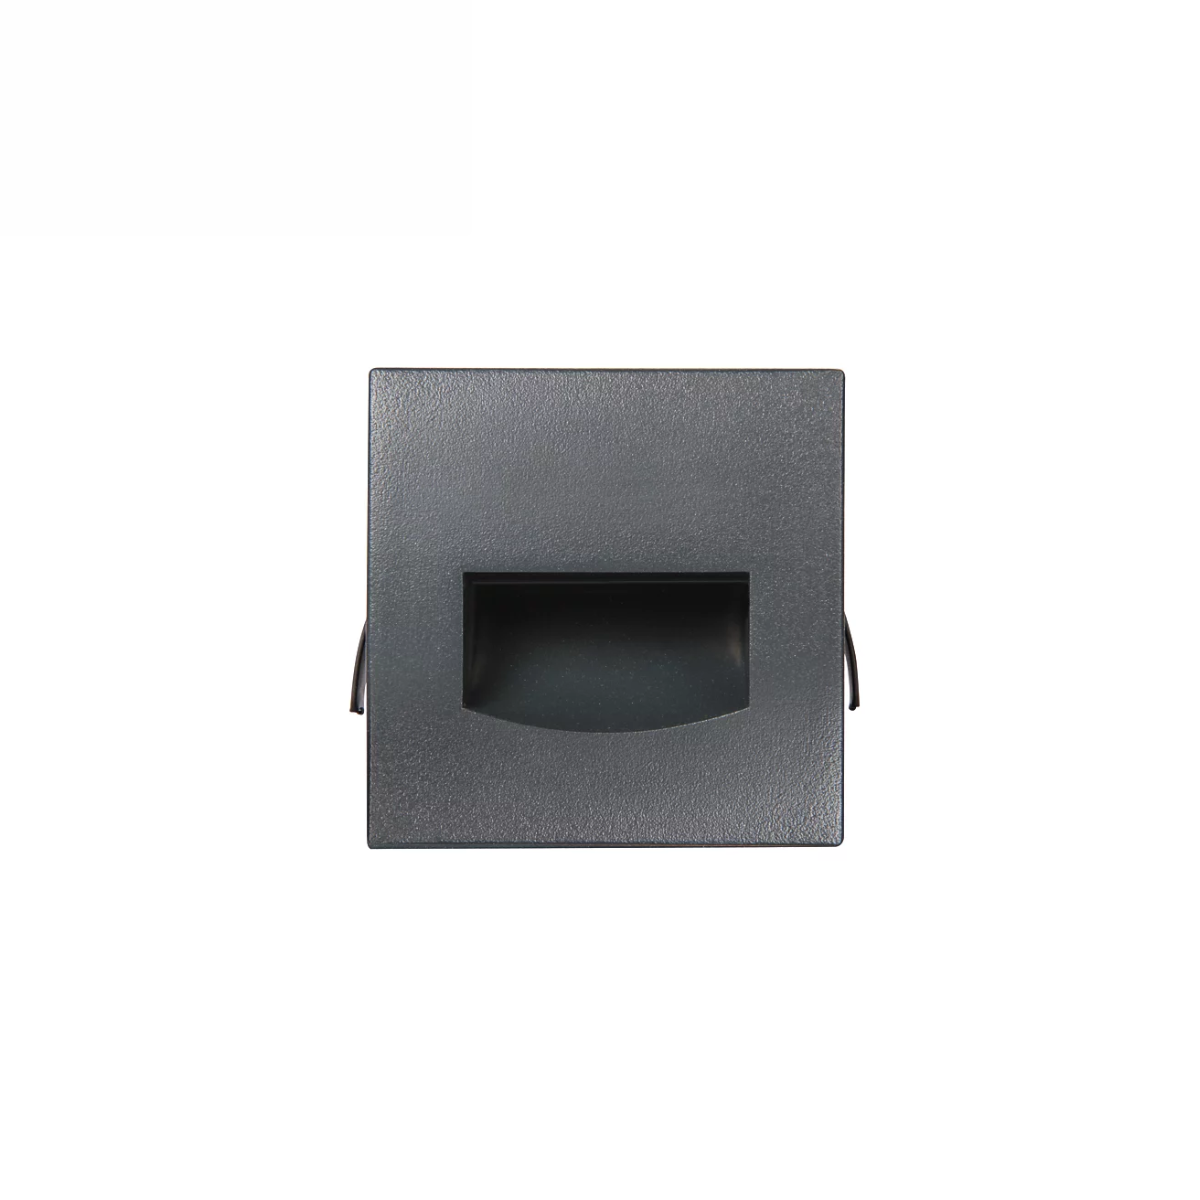 Philips Outdoor Recessed Step light